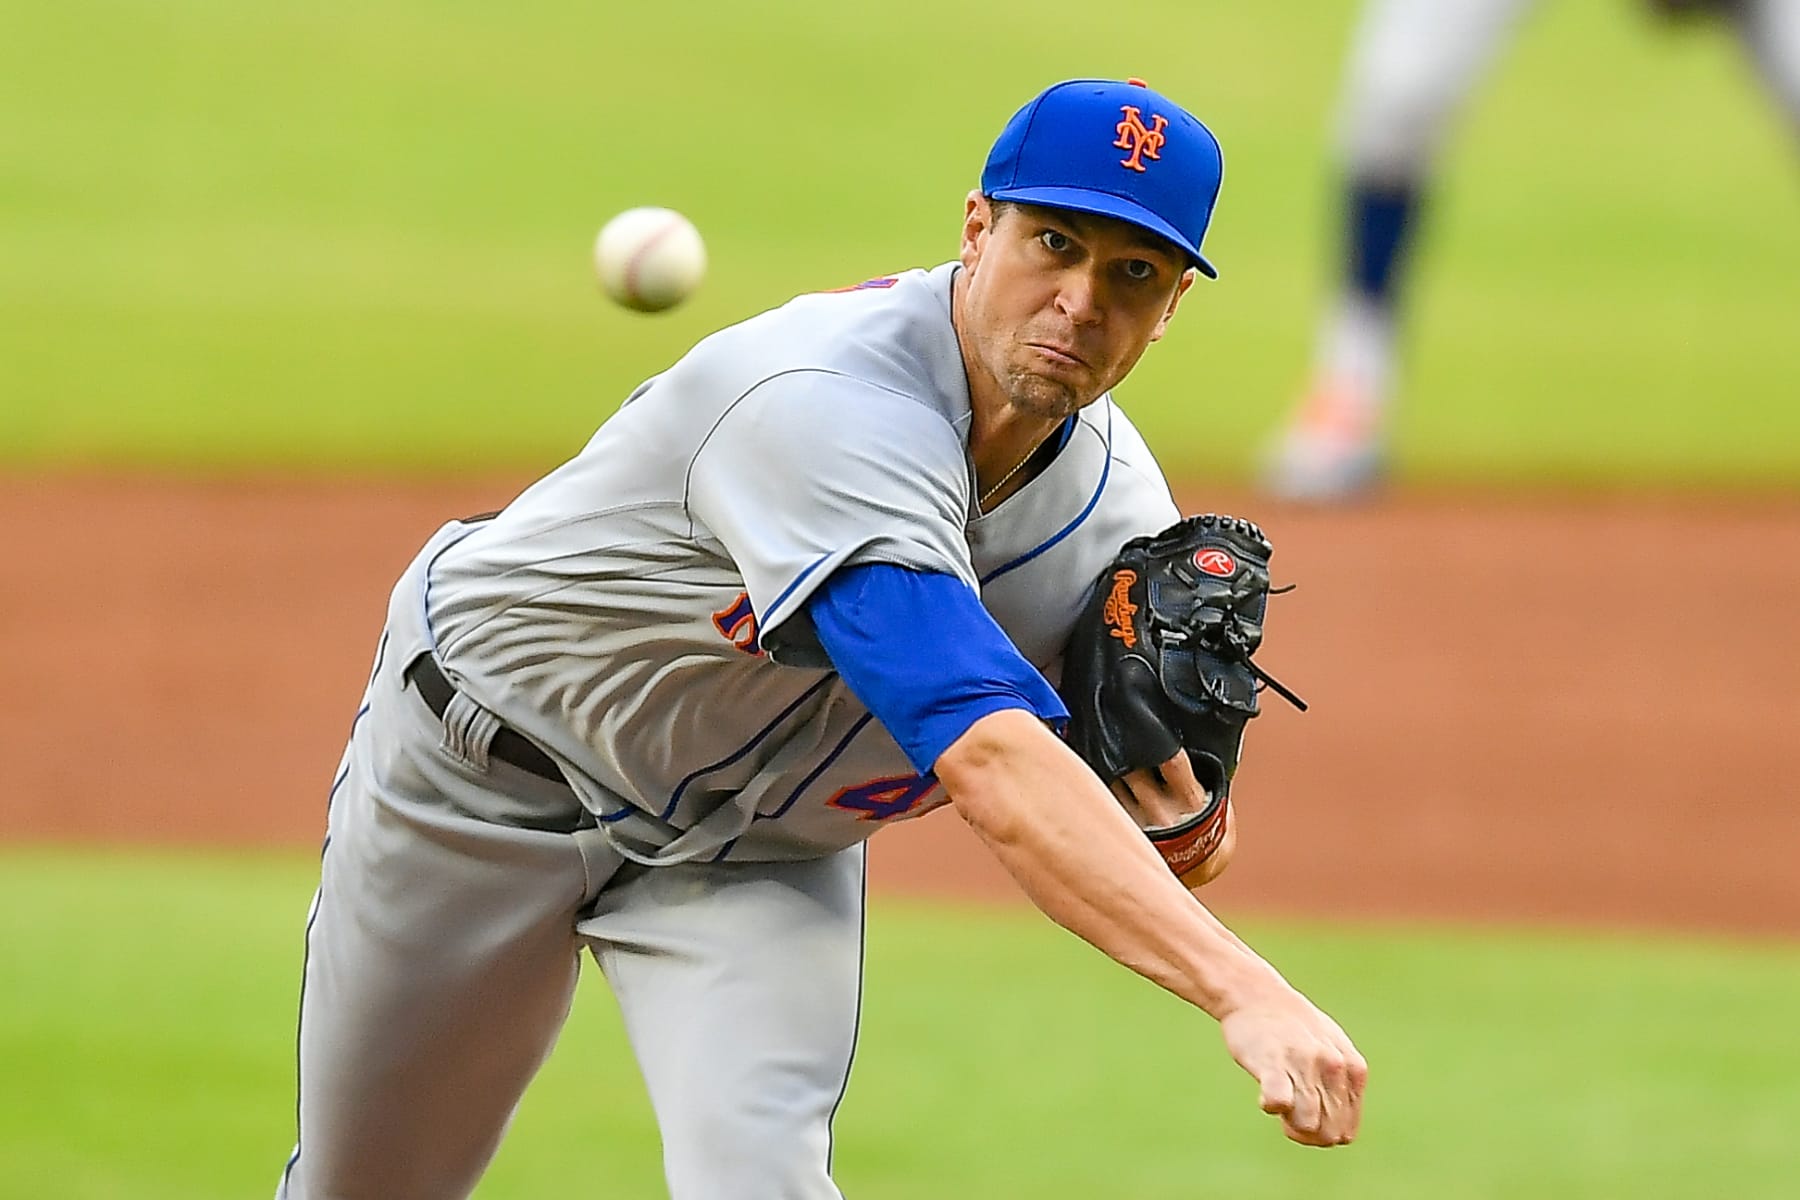 MLB roundup: Jacob DeGrom sparkles in return, but Nats top Mets